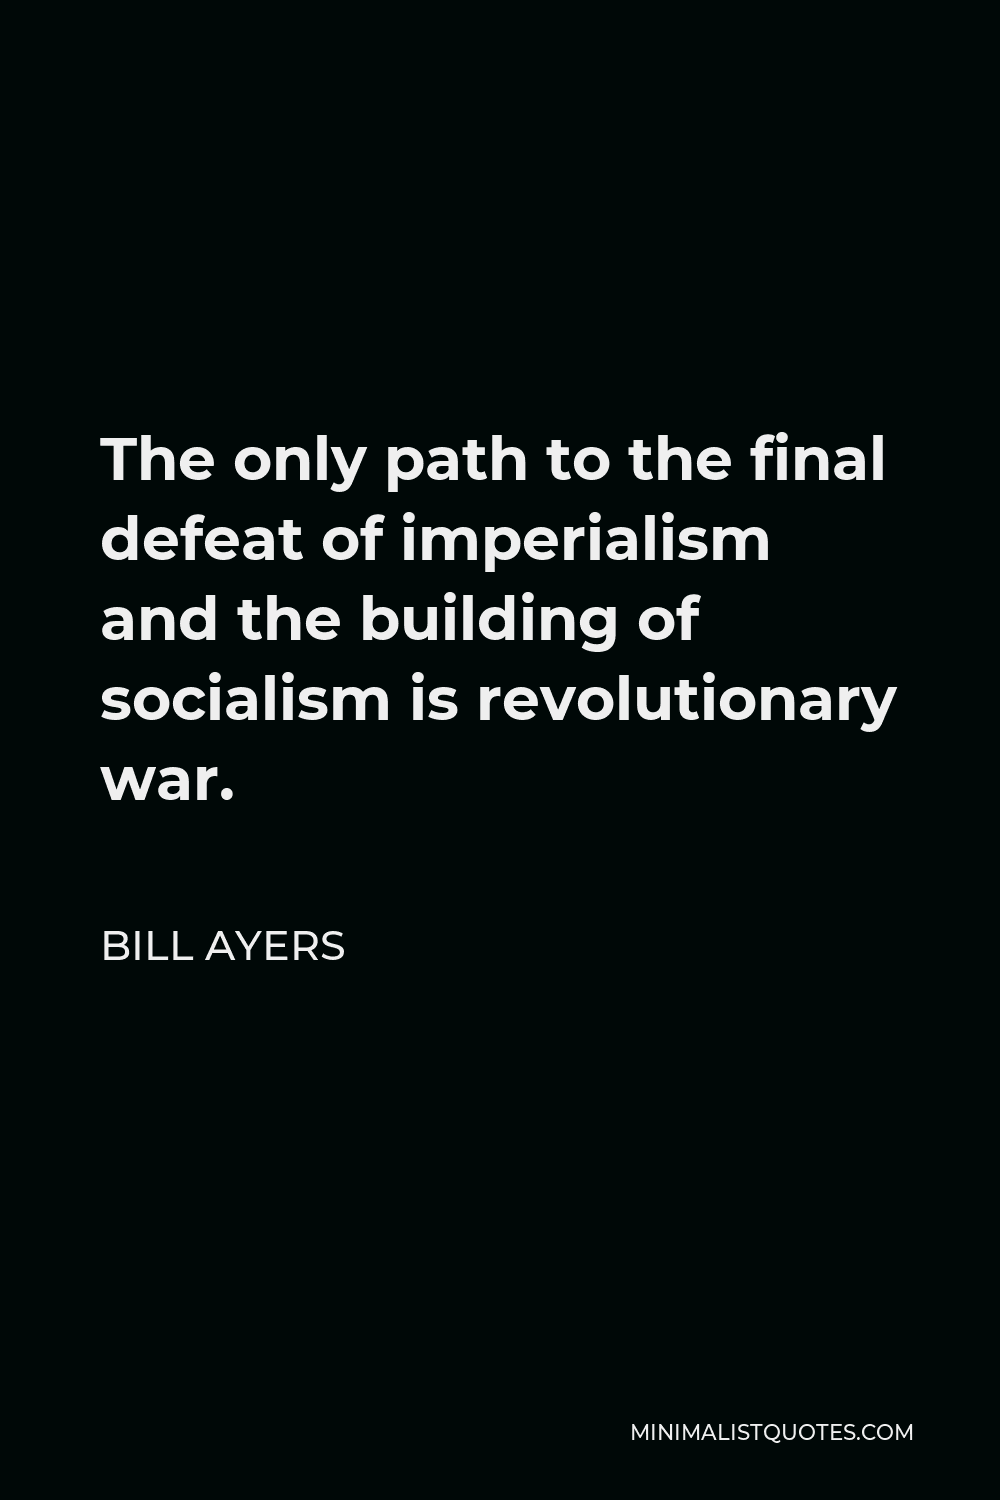 Bill Ayers Quote - The only path to the final defeat of imperialism and the building of socialism is revolutionary war.